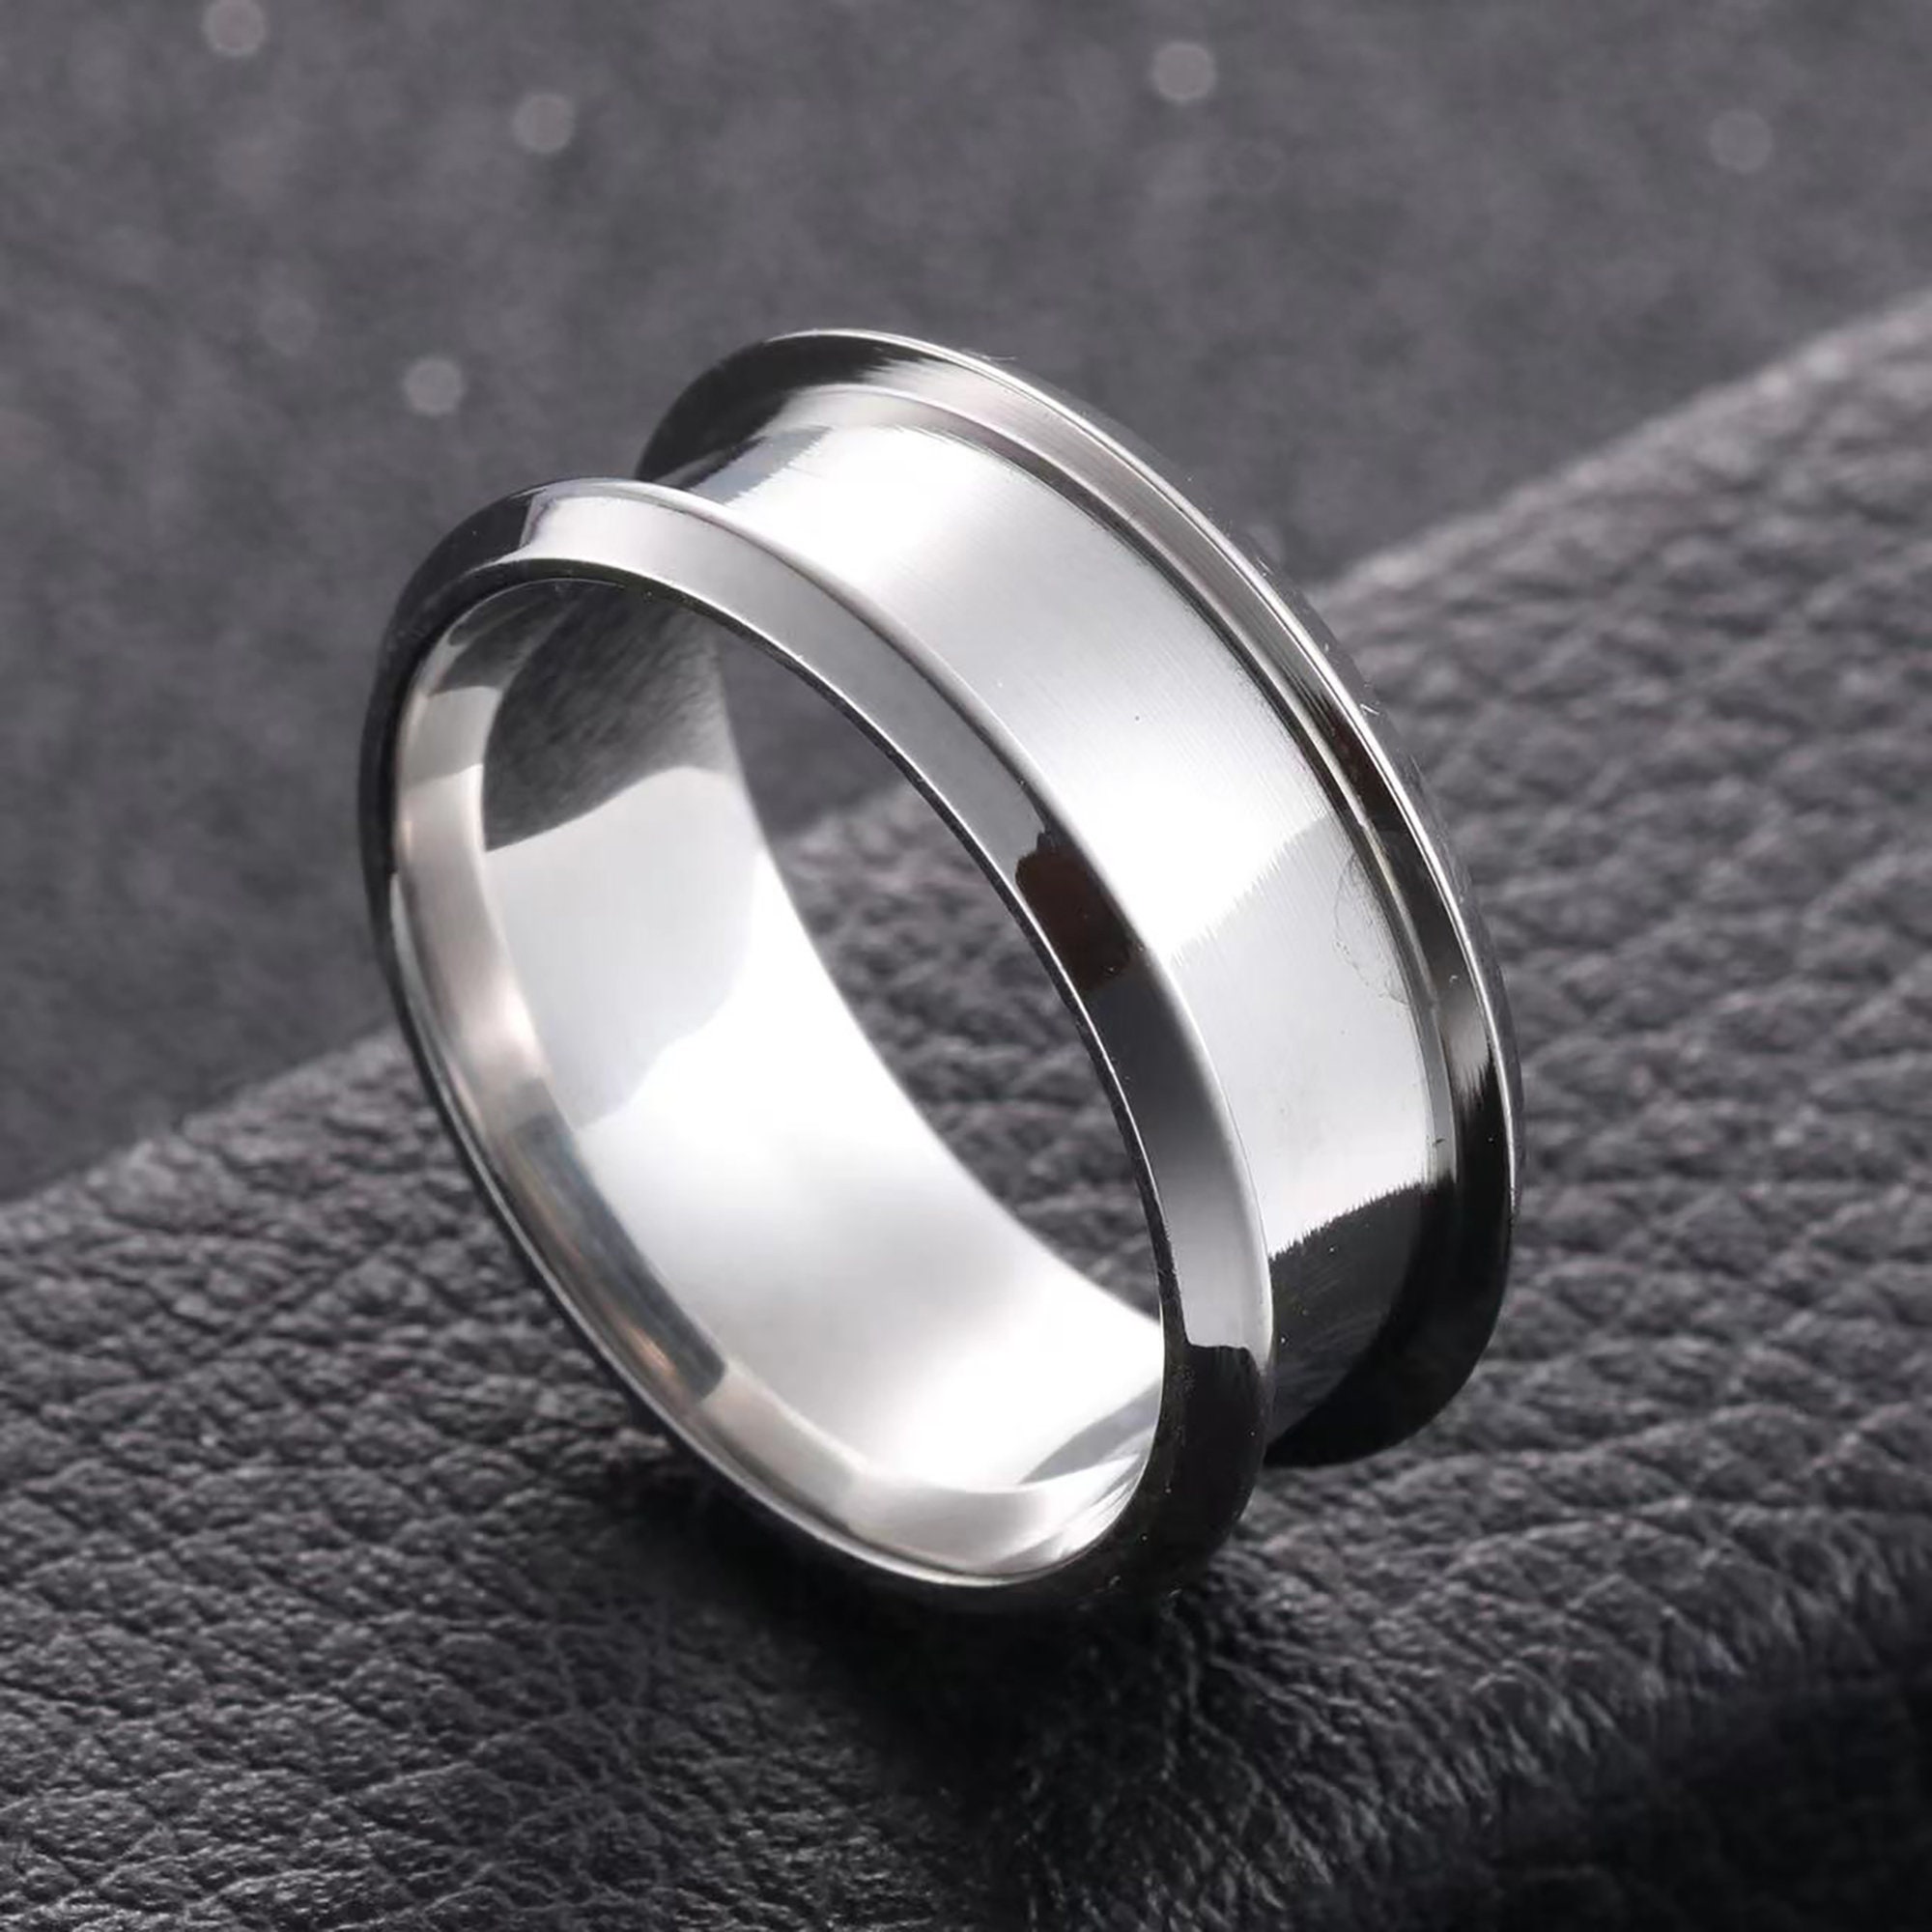 Stainless Steel Ring, 8mm Minimalist Ring, Groove Ring, Wedding